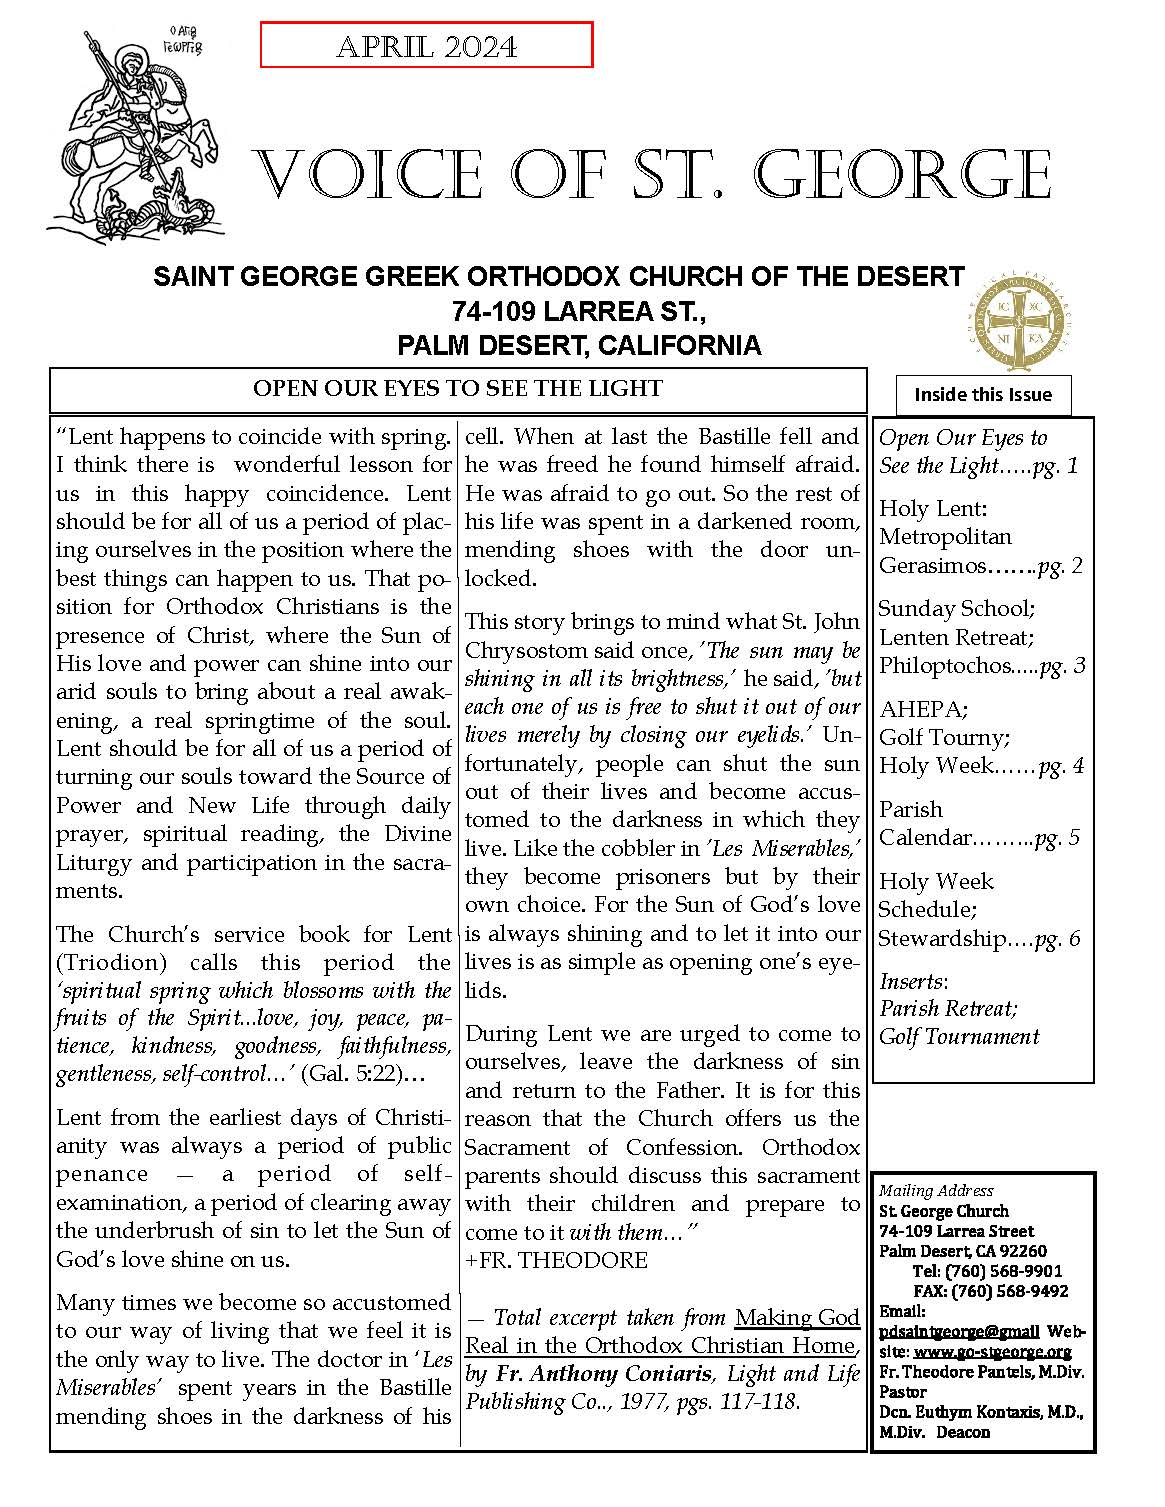 Monthly Voice of St. George